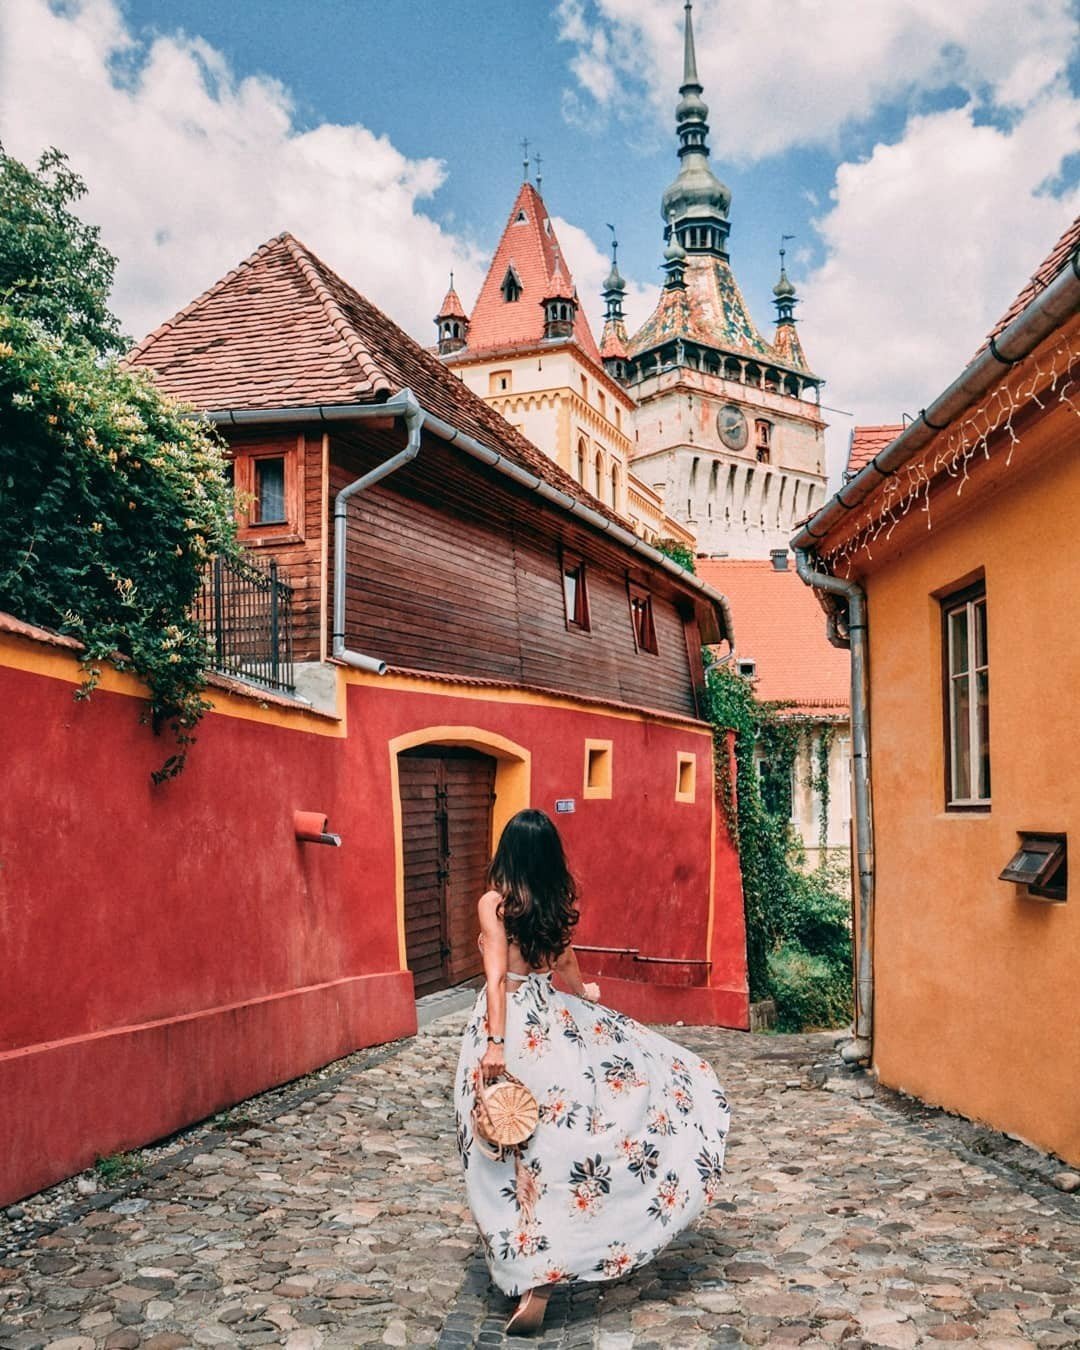 Girl with a white dress and summer flowers at the entrance to the colorful and charming citadel of Sighisoara